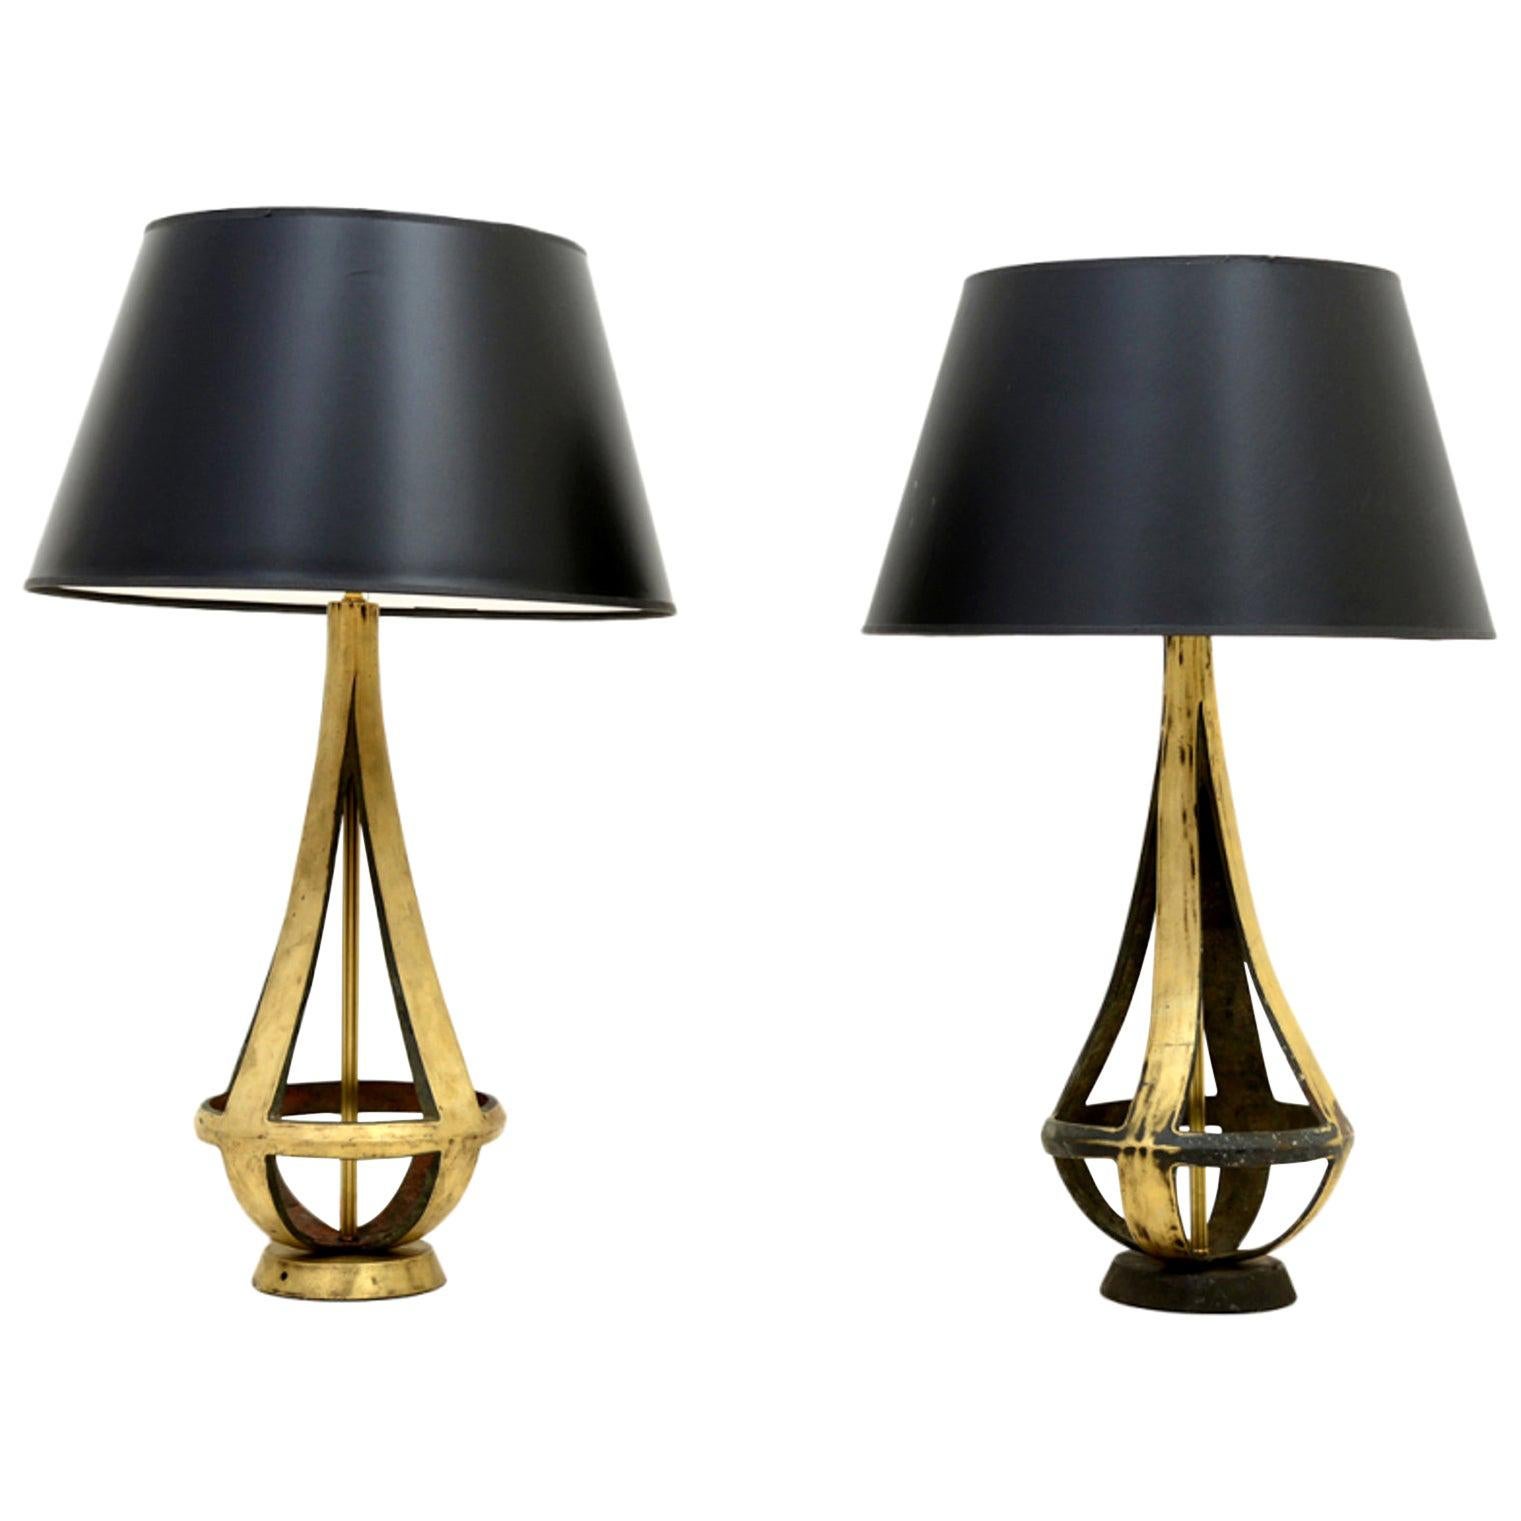 Luxury Two Toned Brass and Bronze Table Lamps by Arturo Pani 1950s Modernism